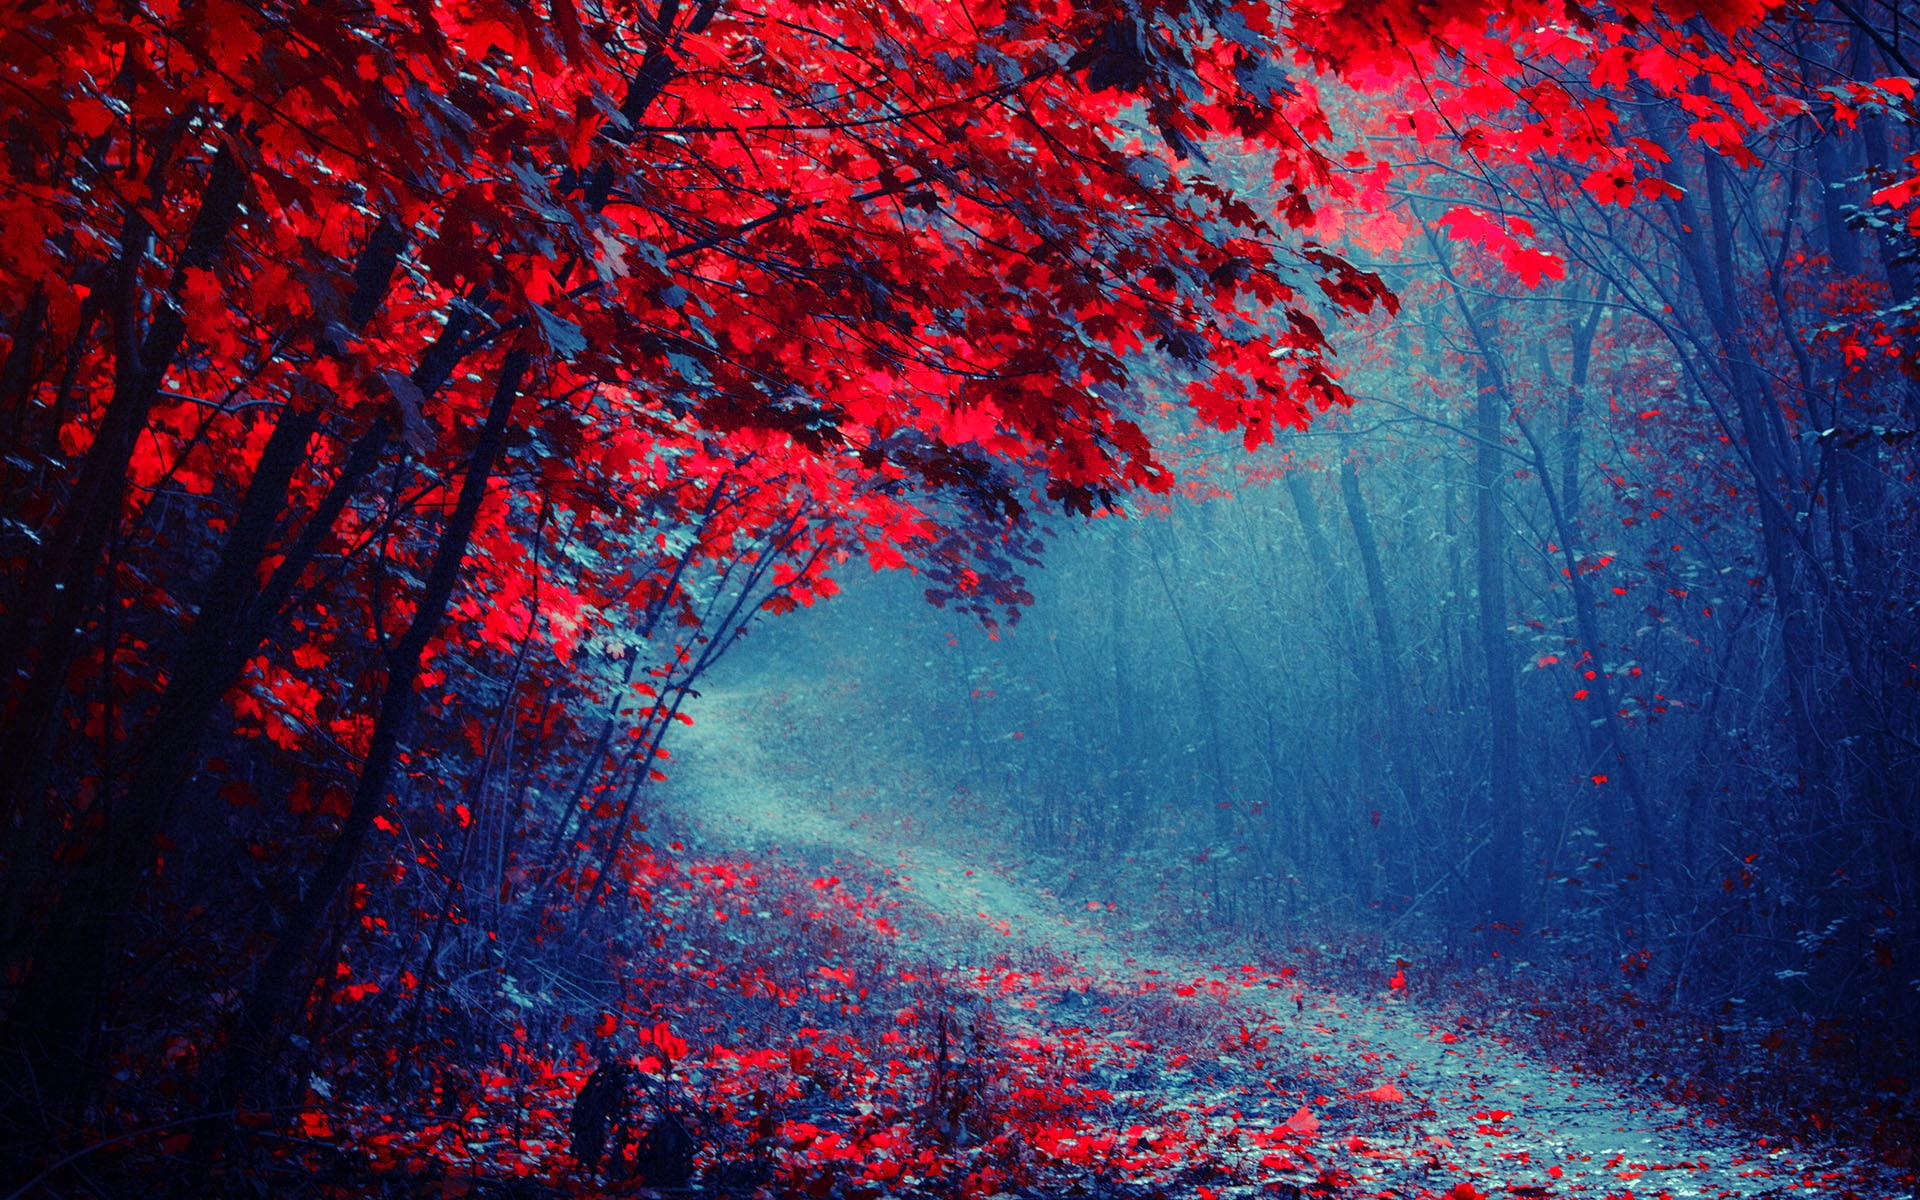 Red leaves forest, road, trees, autumn, mist, trail